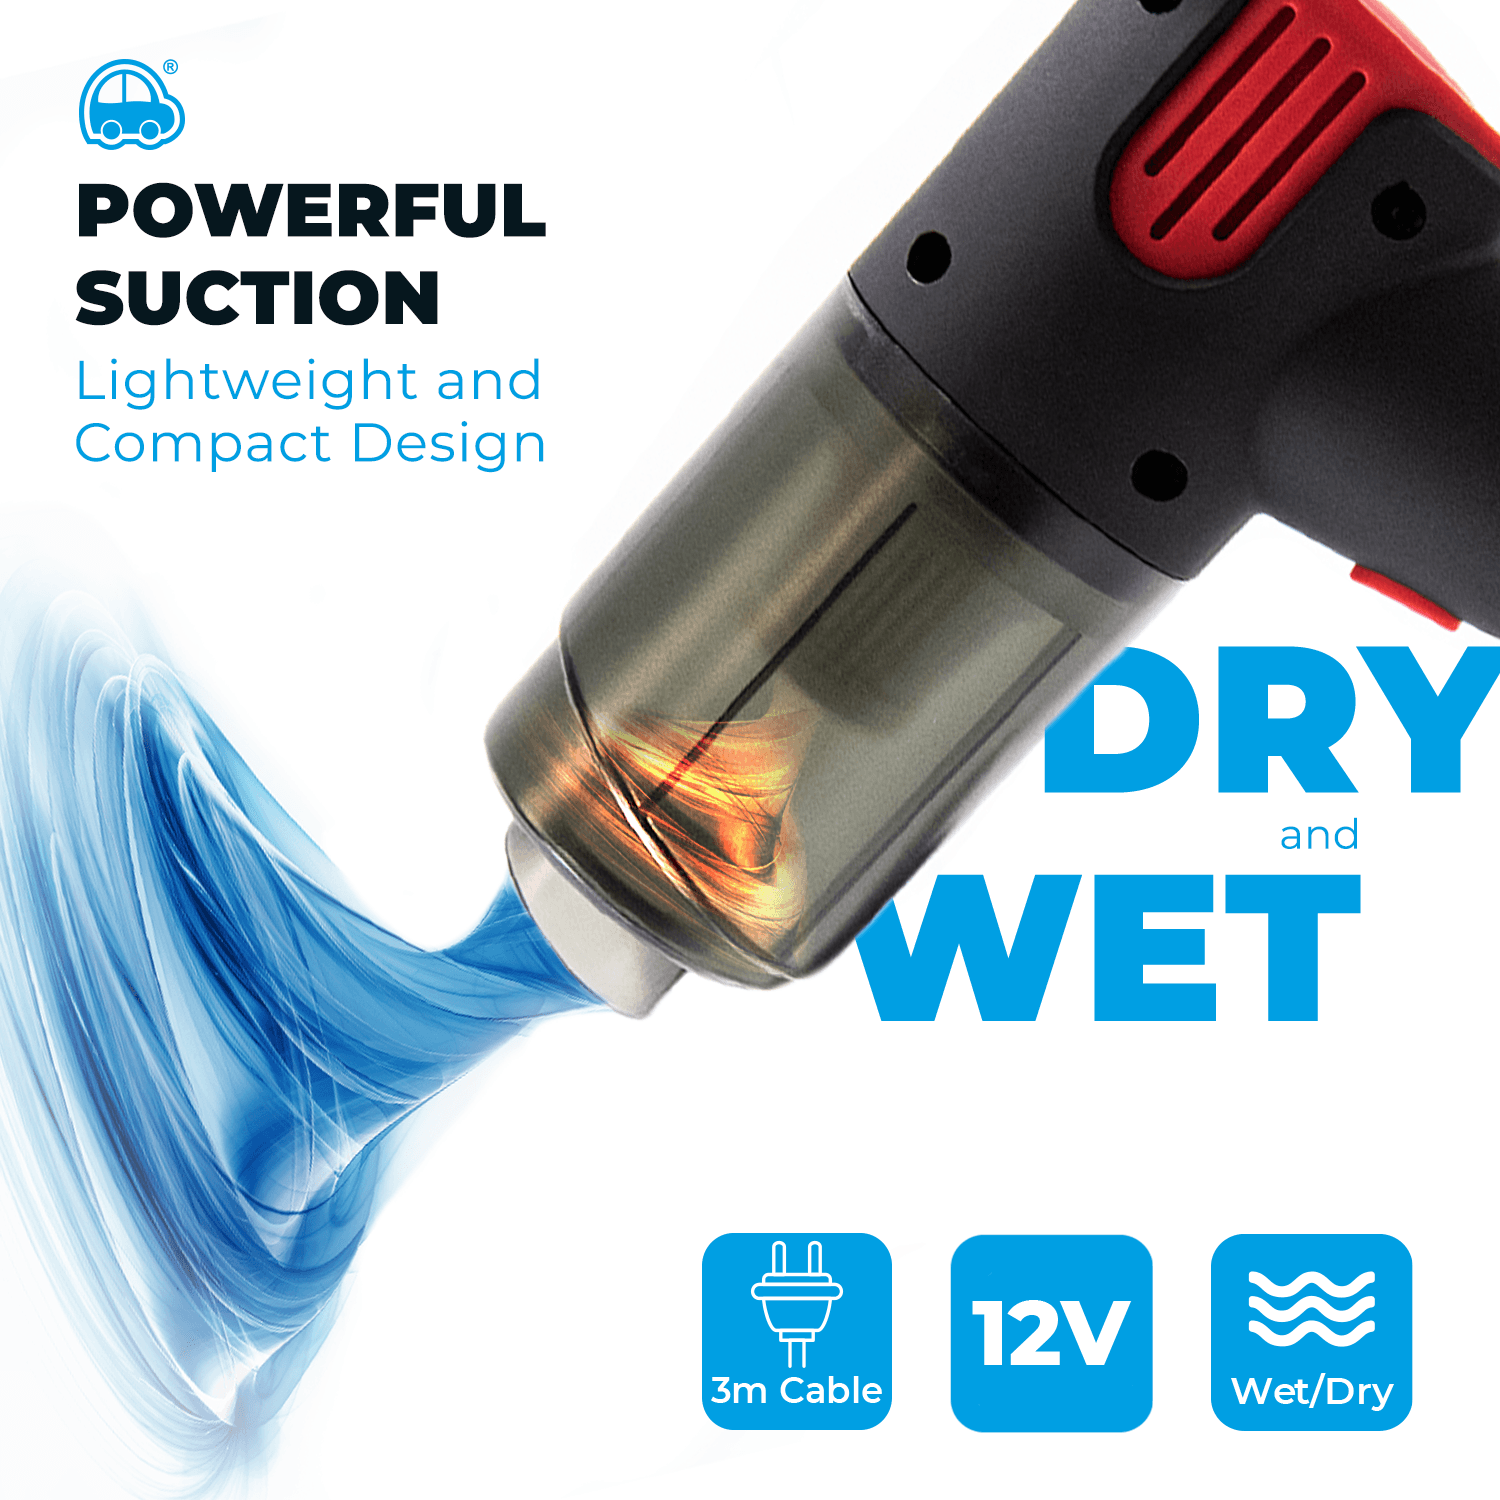 Simply Auto Wet/Dry Compact Vacuum